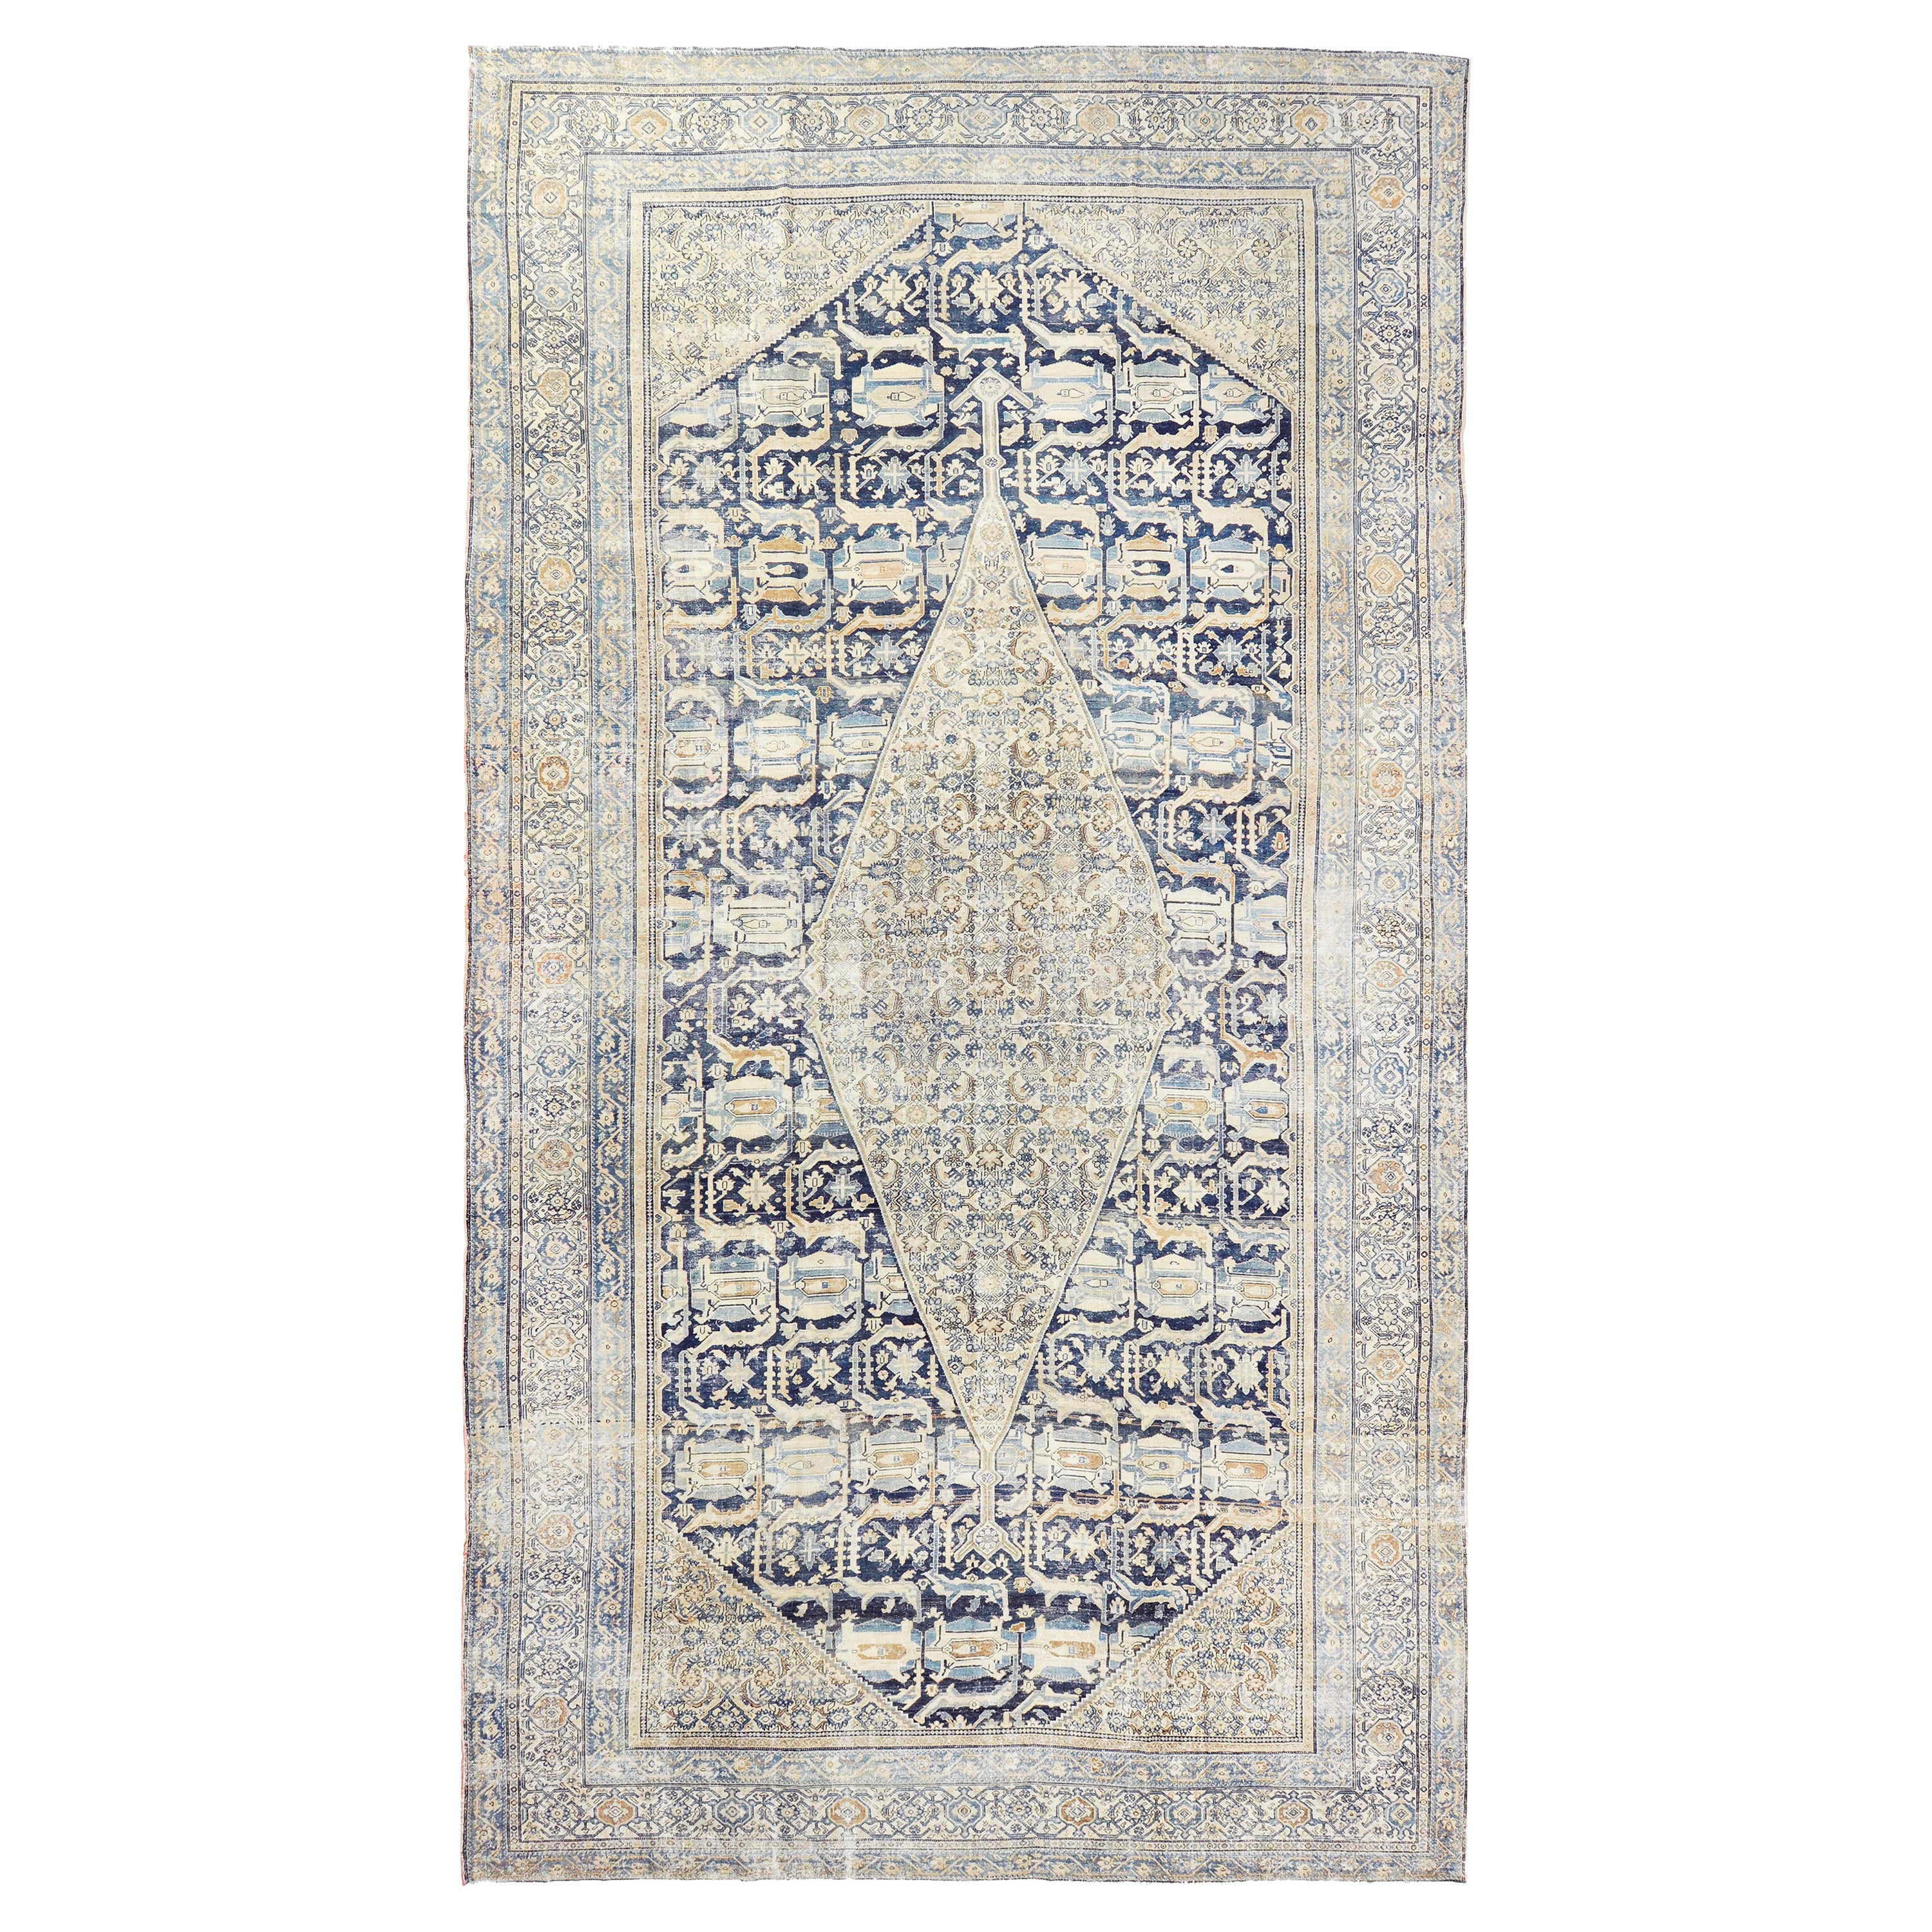 Antique Persian Malayer Rug 26508 For Sale